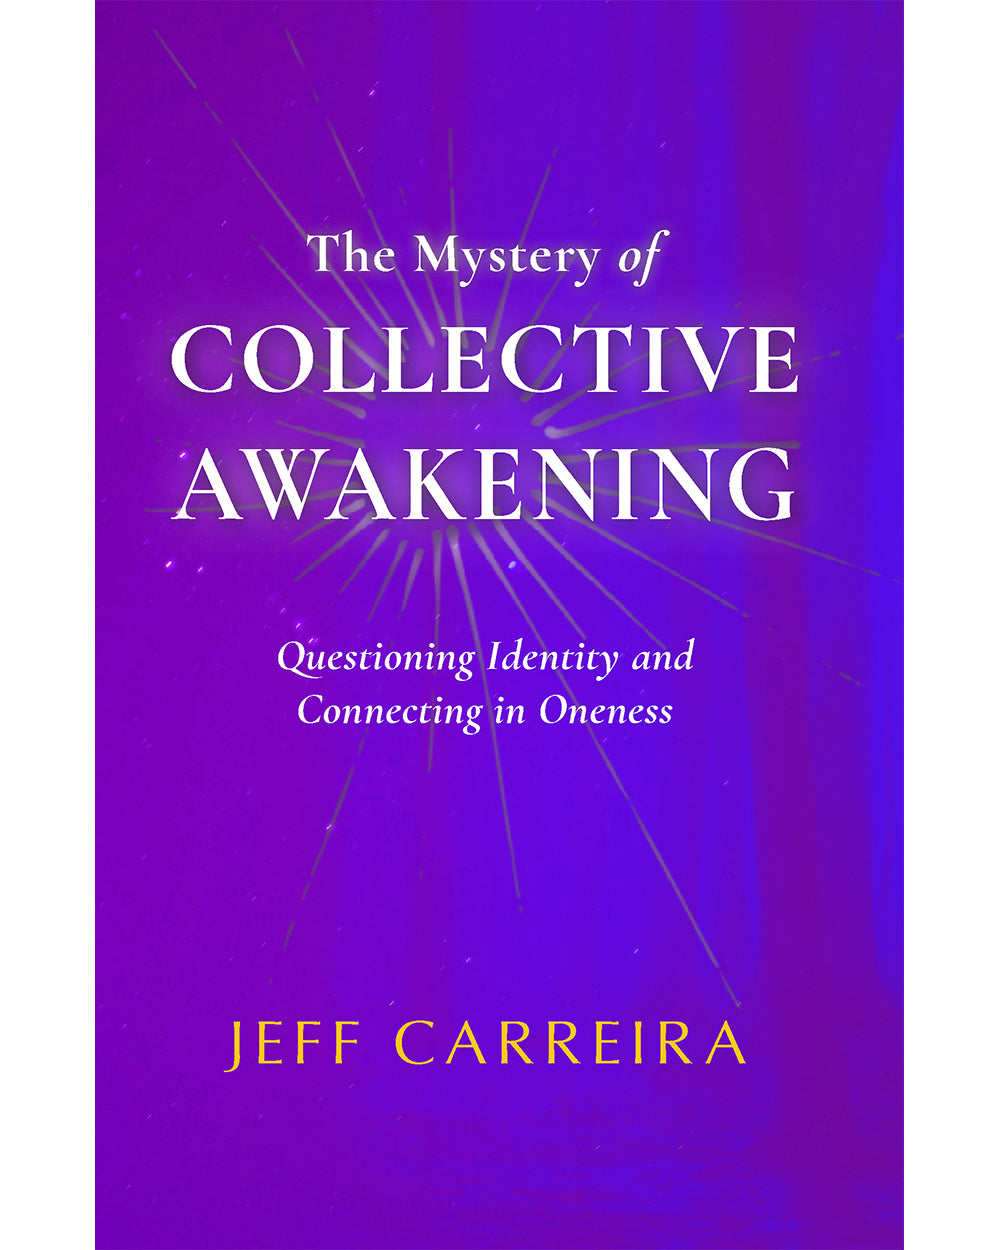 The Mystery of Collective Awakening: Questioning Identity and Connecting in Oneness